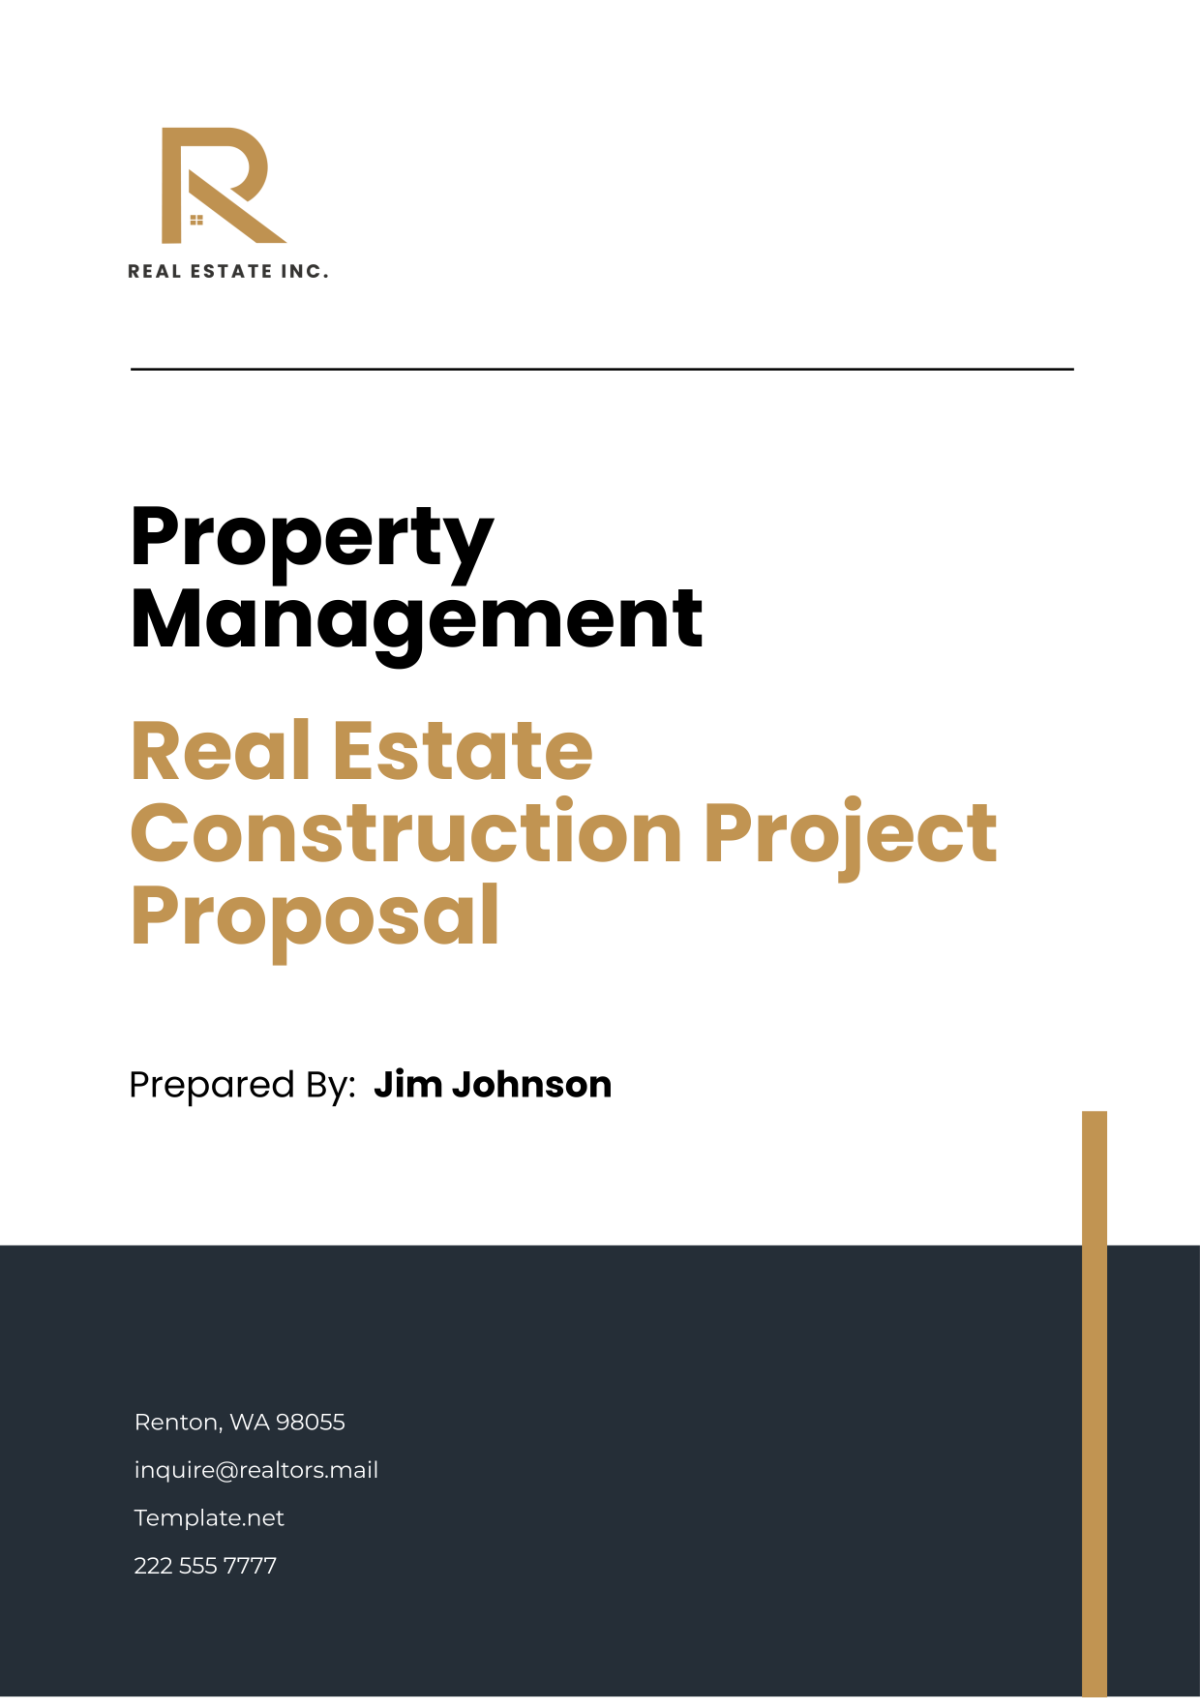 Real Estate Construction Project Proposal Template